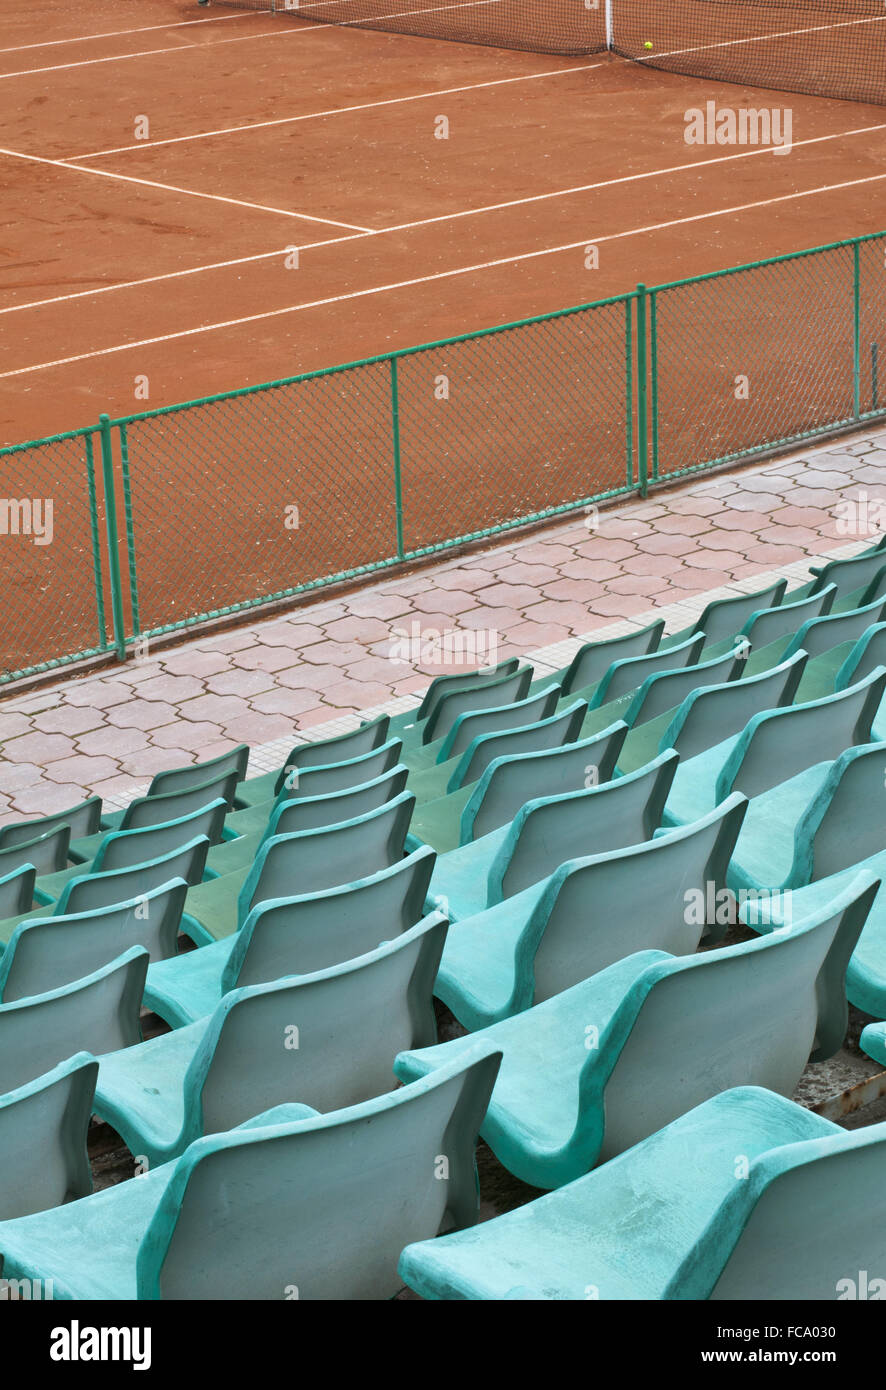 Grandstand seats and tennis court Stock Photo - Alamy